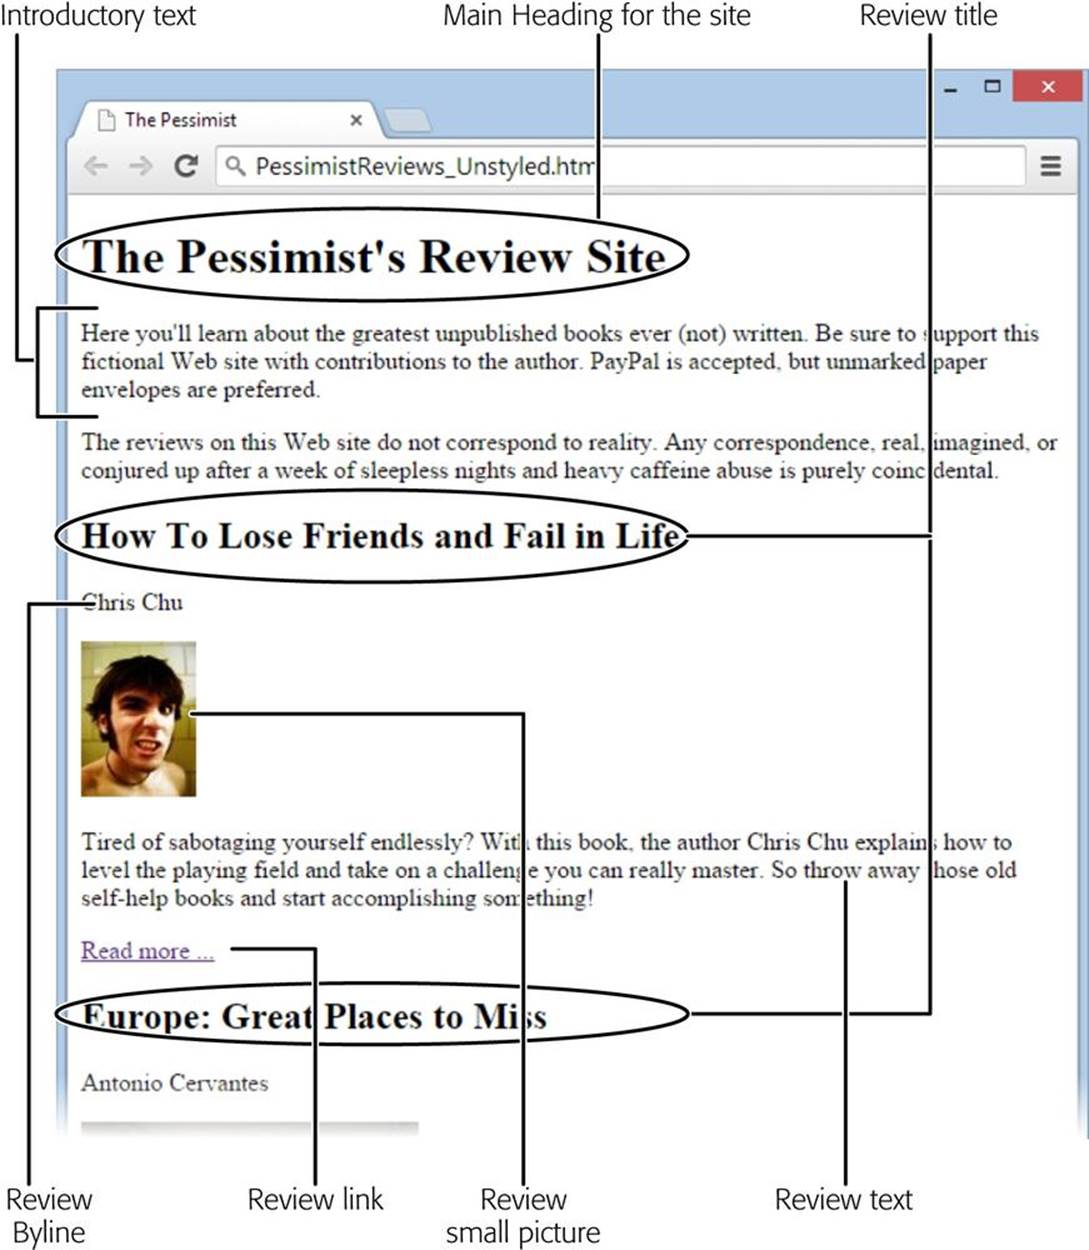 In the average HTML document, you have a sea of similar elements—even a complex page often boils down to just headings and paragraph elements. In this example, the general introduction, the author byline, and the book summaries all use <p> elements. However, you should format these elements differently, because they represent different types of content. You’ll tackle that task below